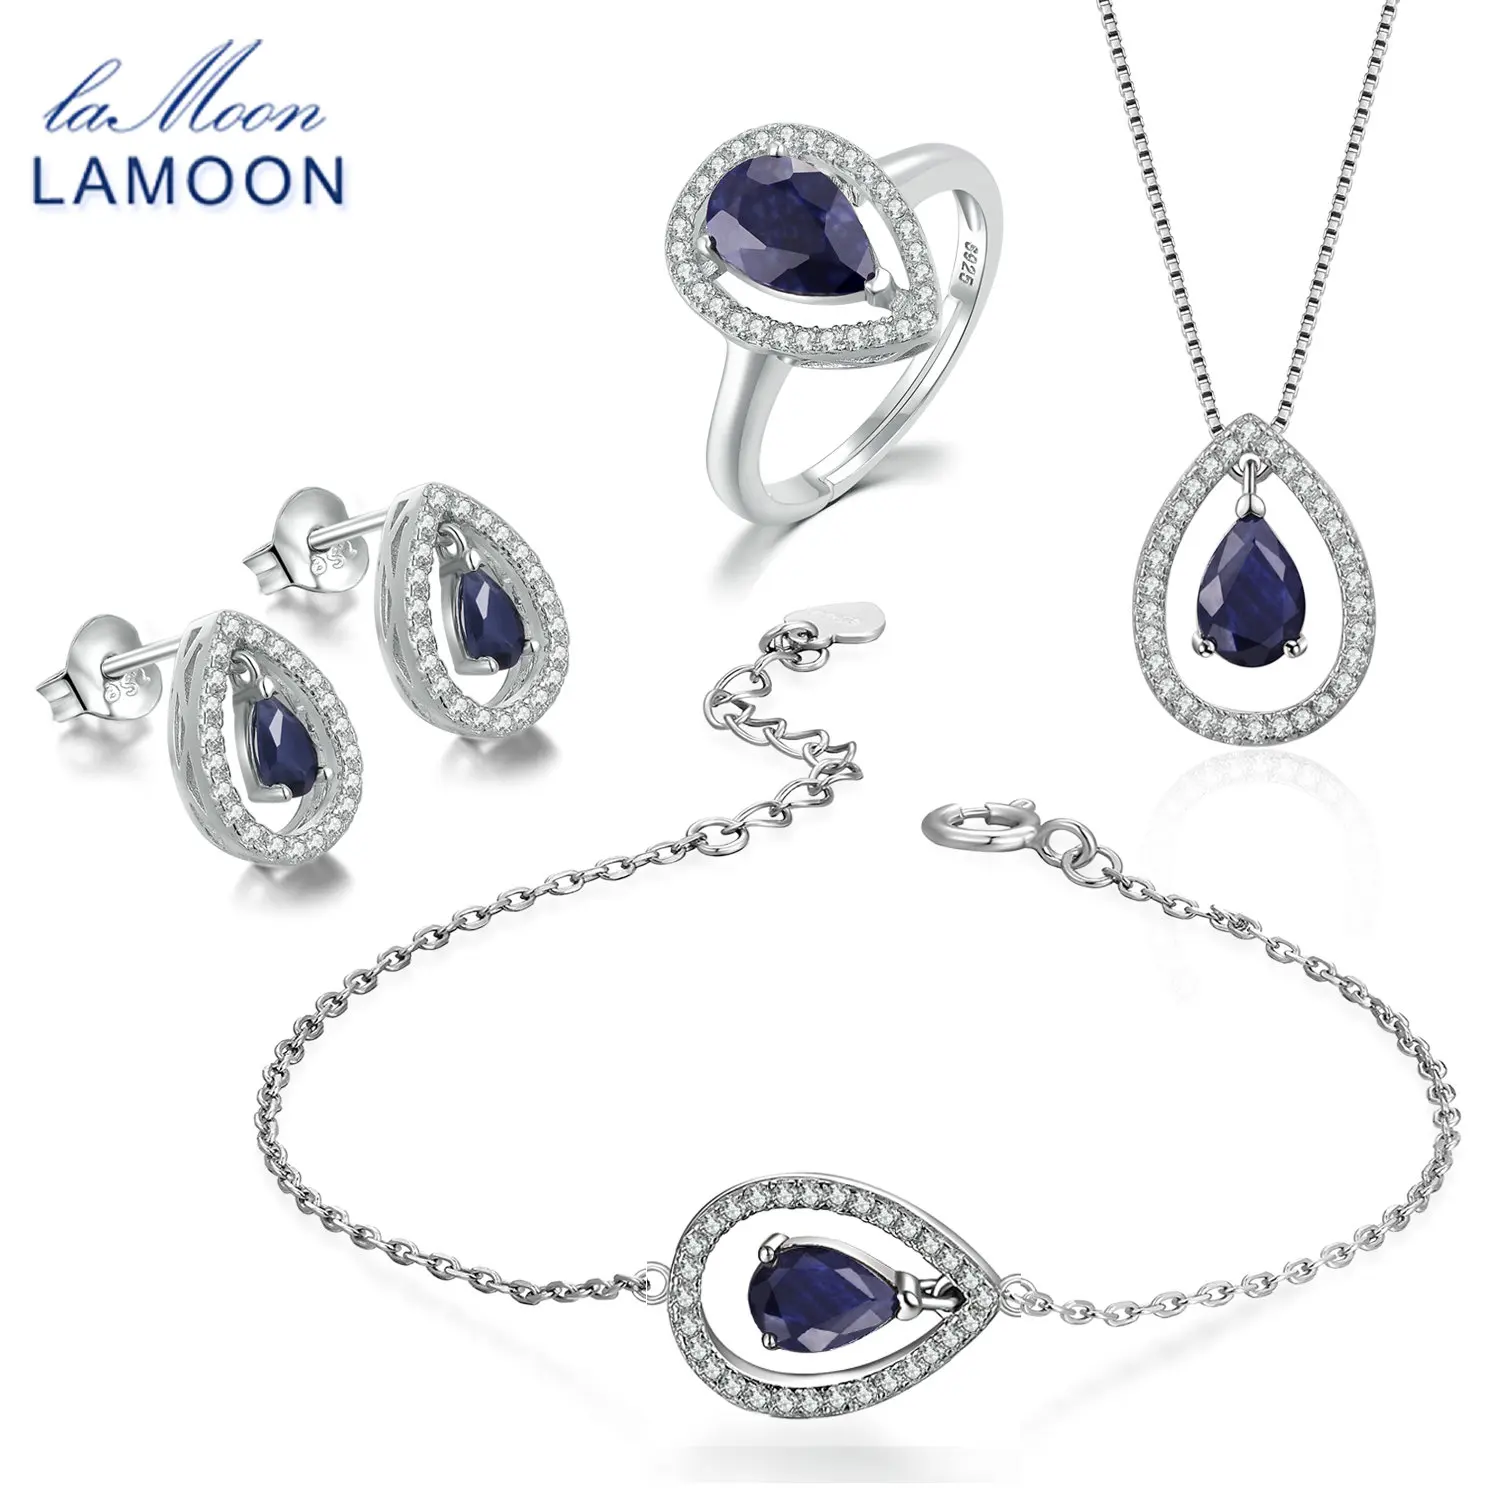 LAMOON Sapphire Jewelry Set for Women Water Drop 100% Real Natural Gemstone 925 sterling-silver-jewelry Ring Earring V040-1